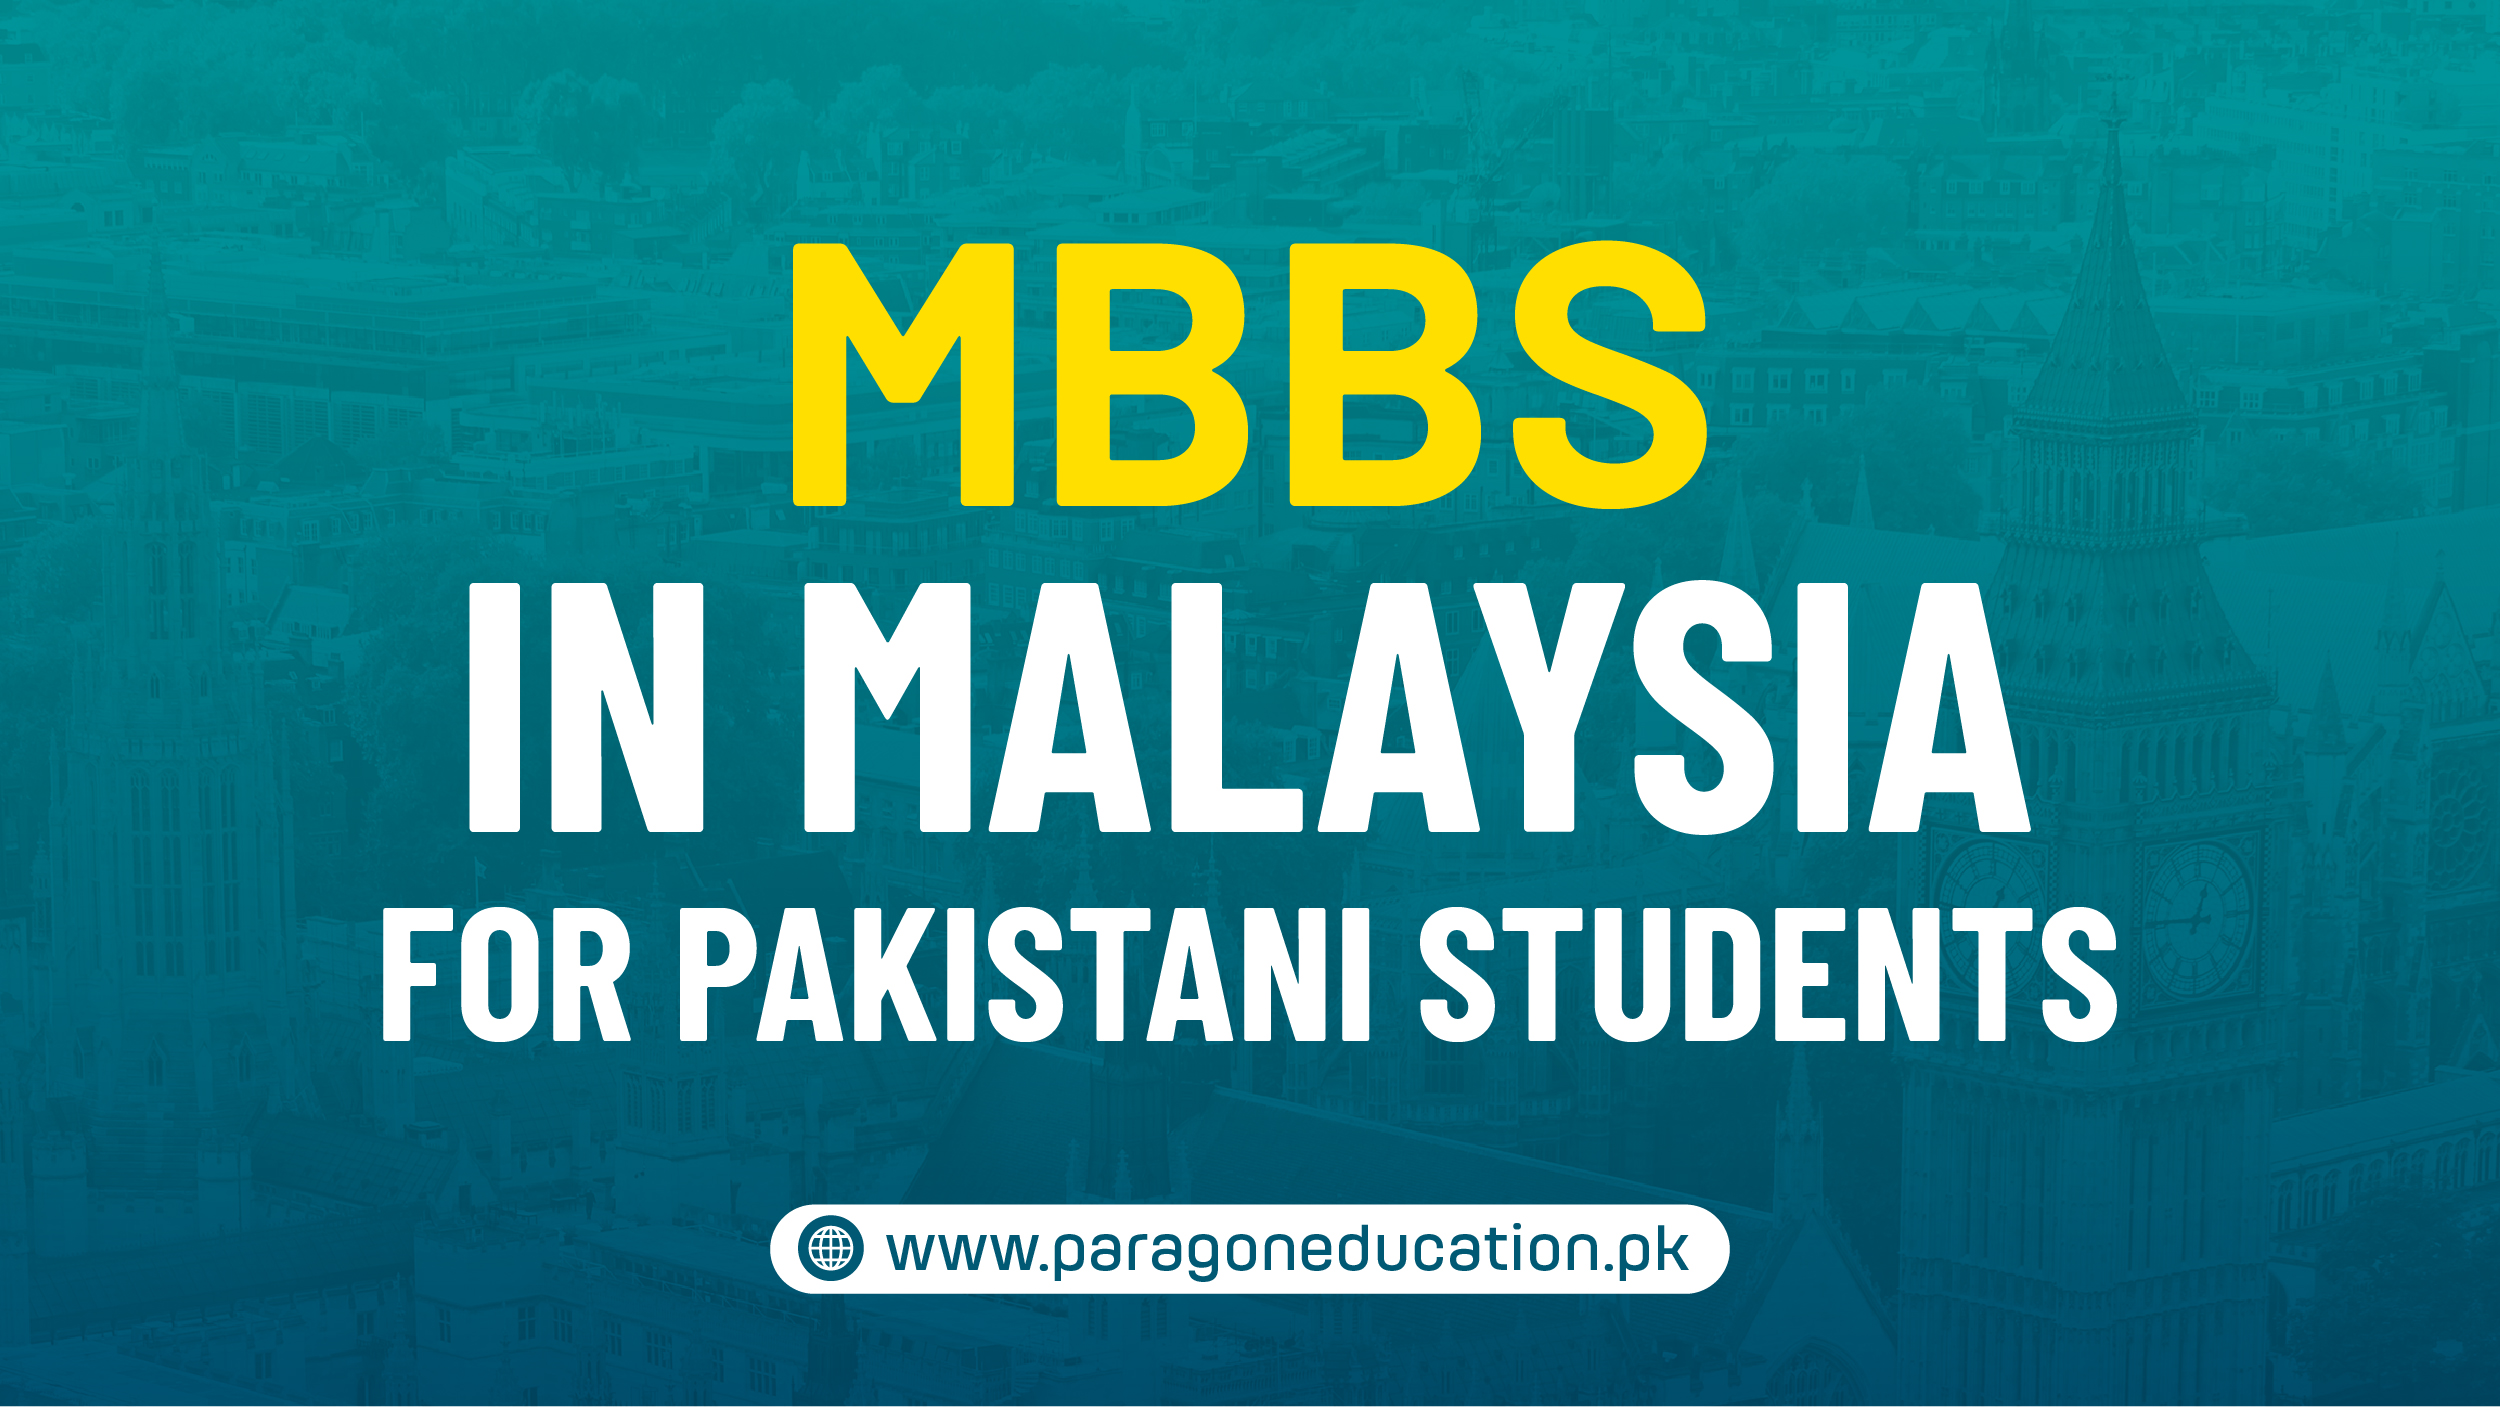 MBBS in Malaysia for Pakistani Students